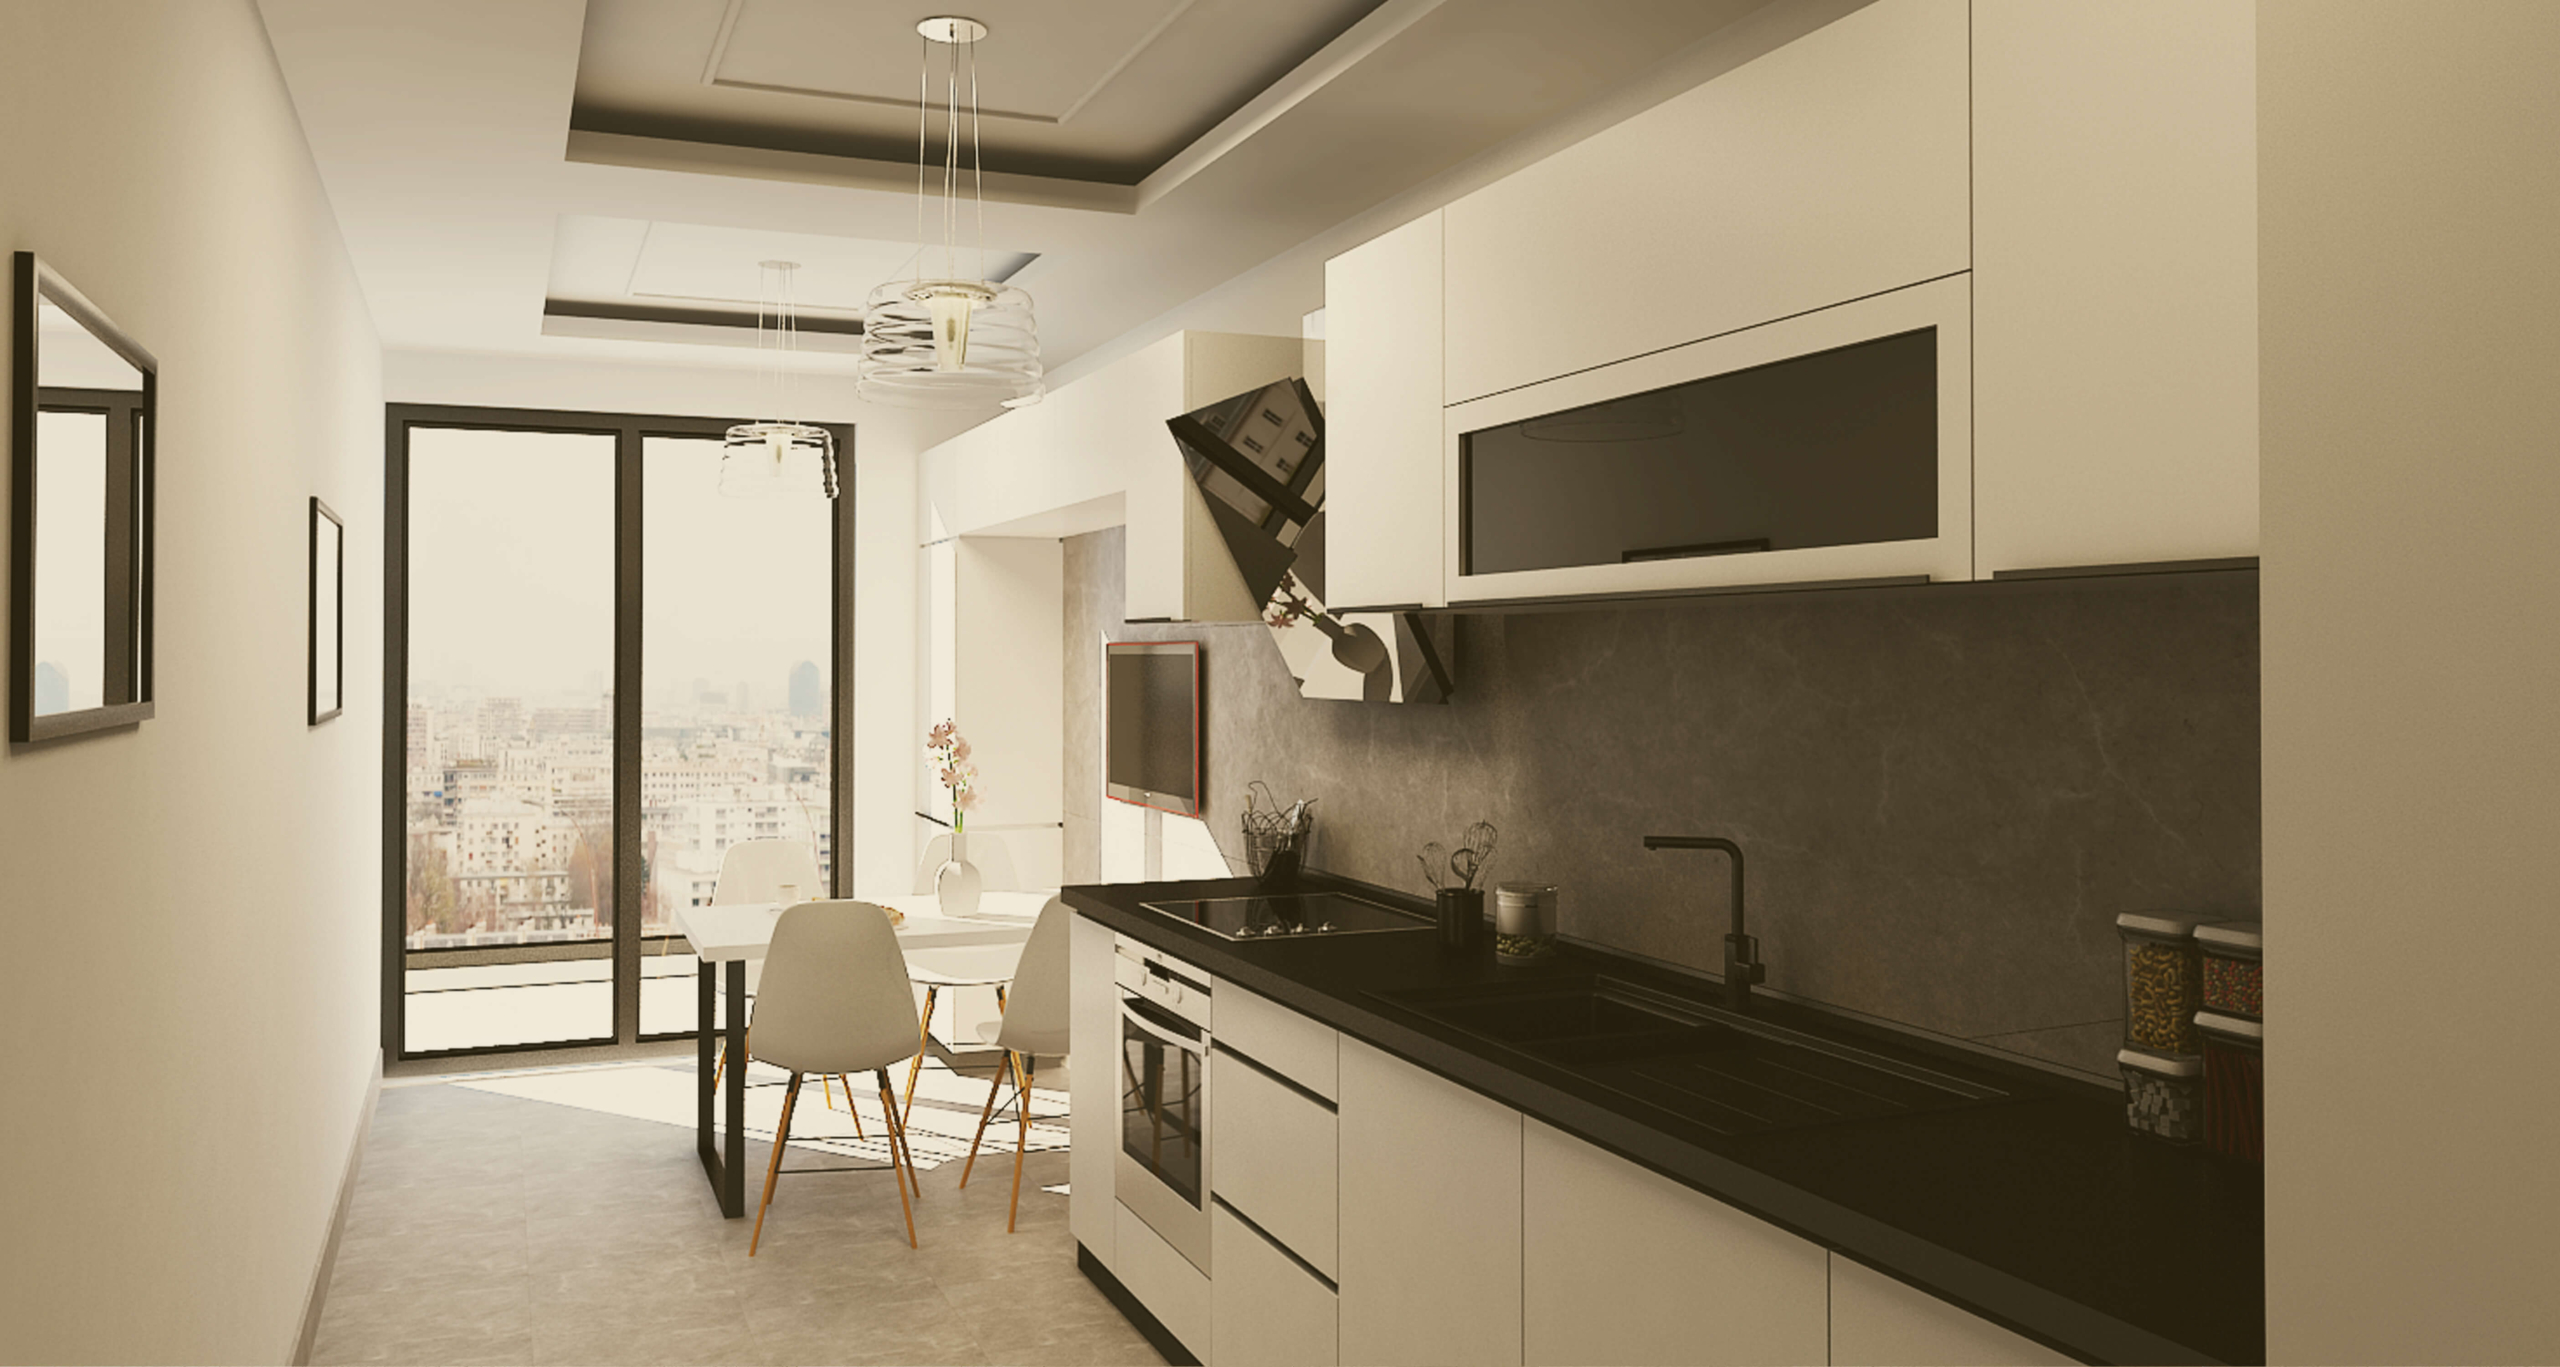 Apartments for sale in Istanbul